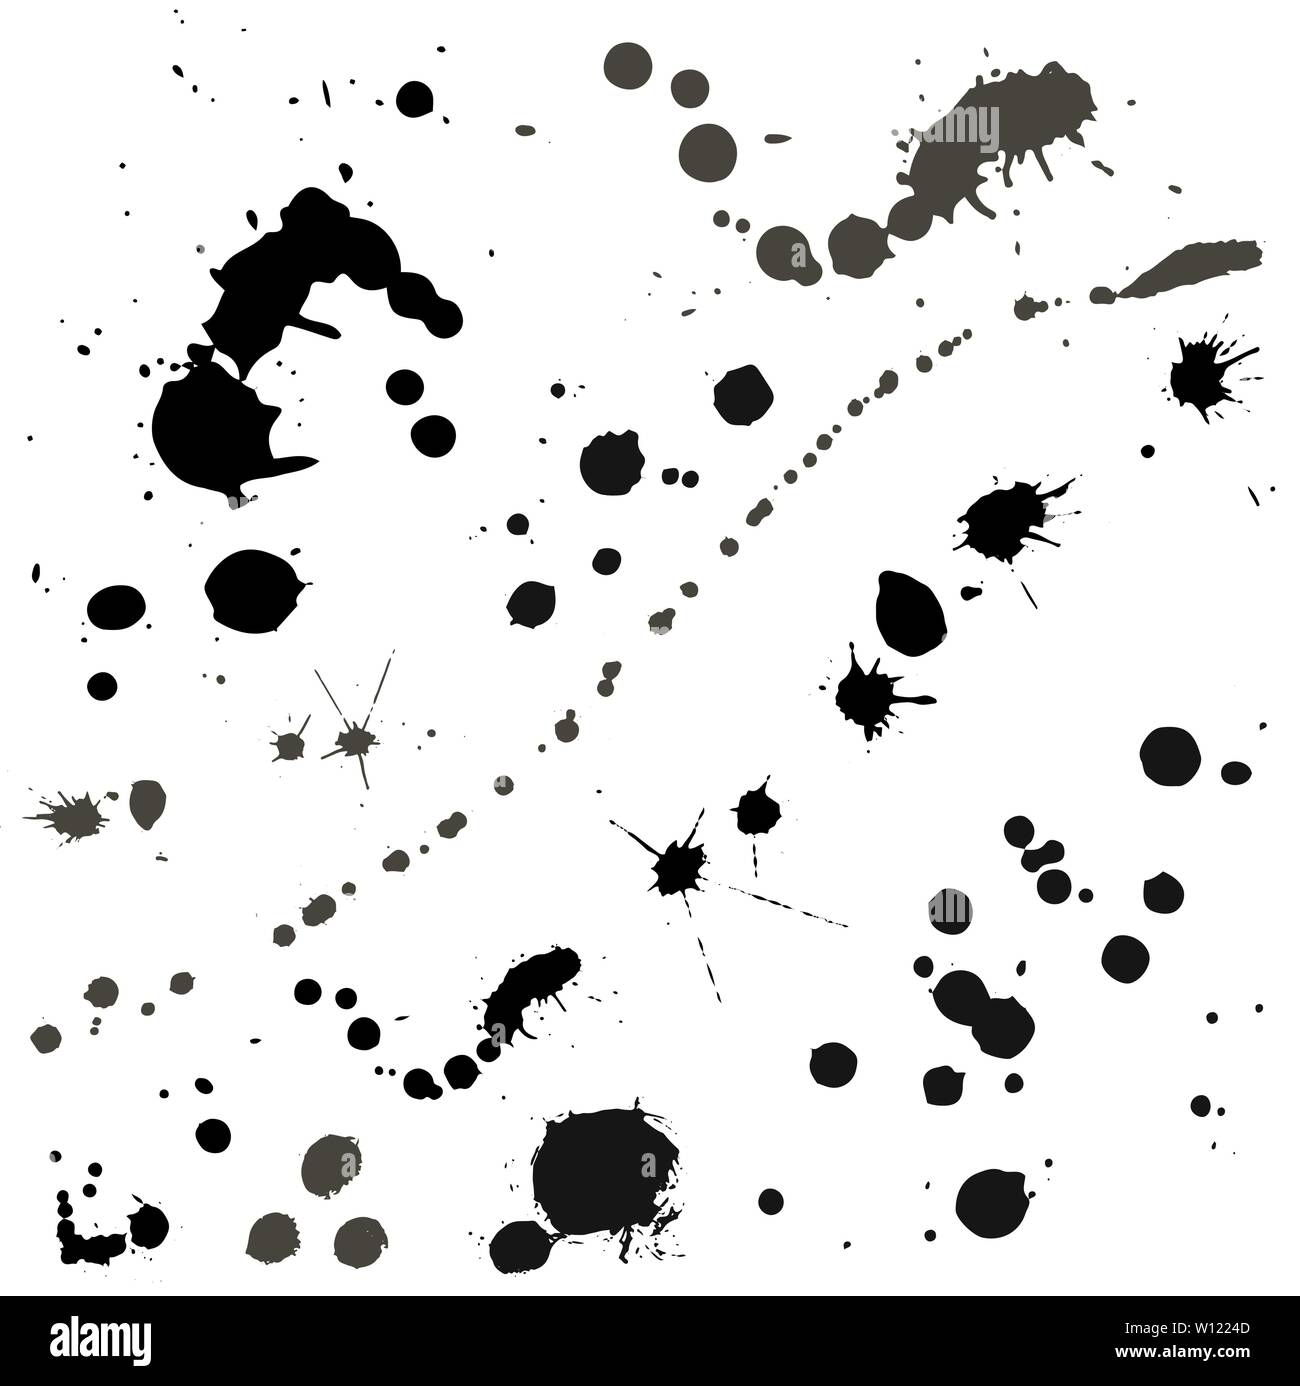 Grunge blots. Vector paintbrush set. Round grunge design elements. Dirty texture banners. Ink splatters. Painted objects. Stock Vector